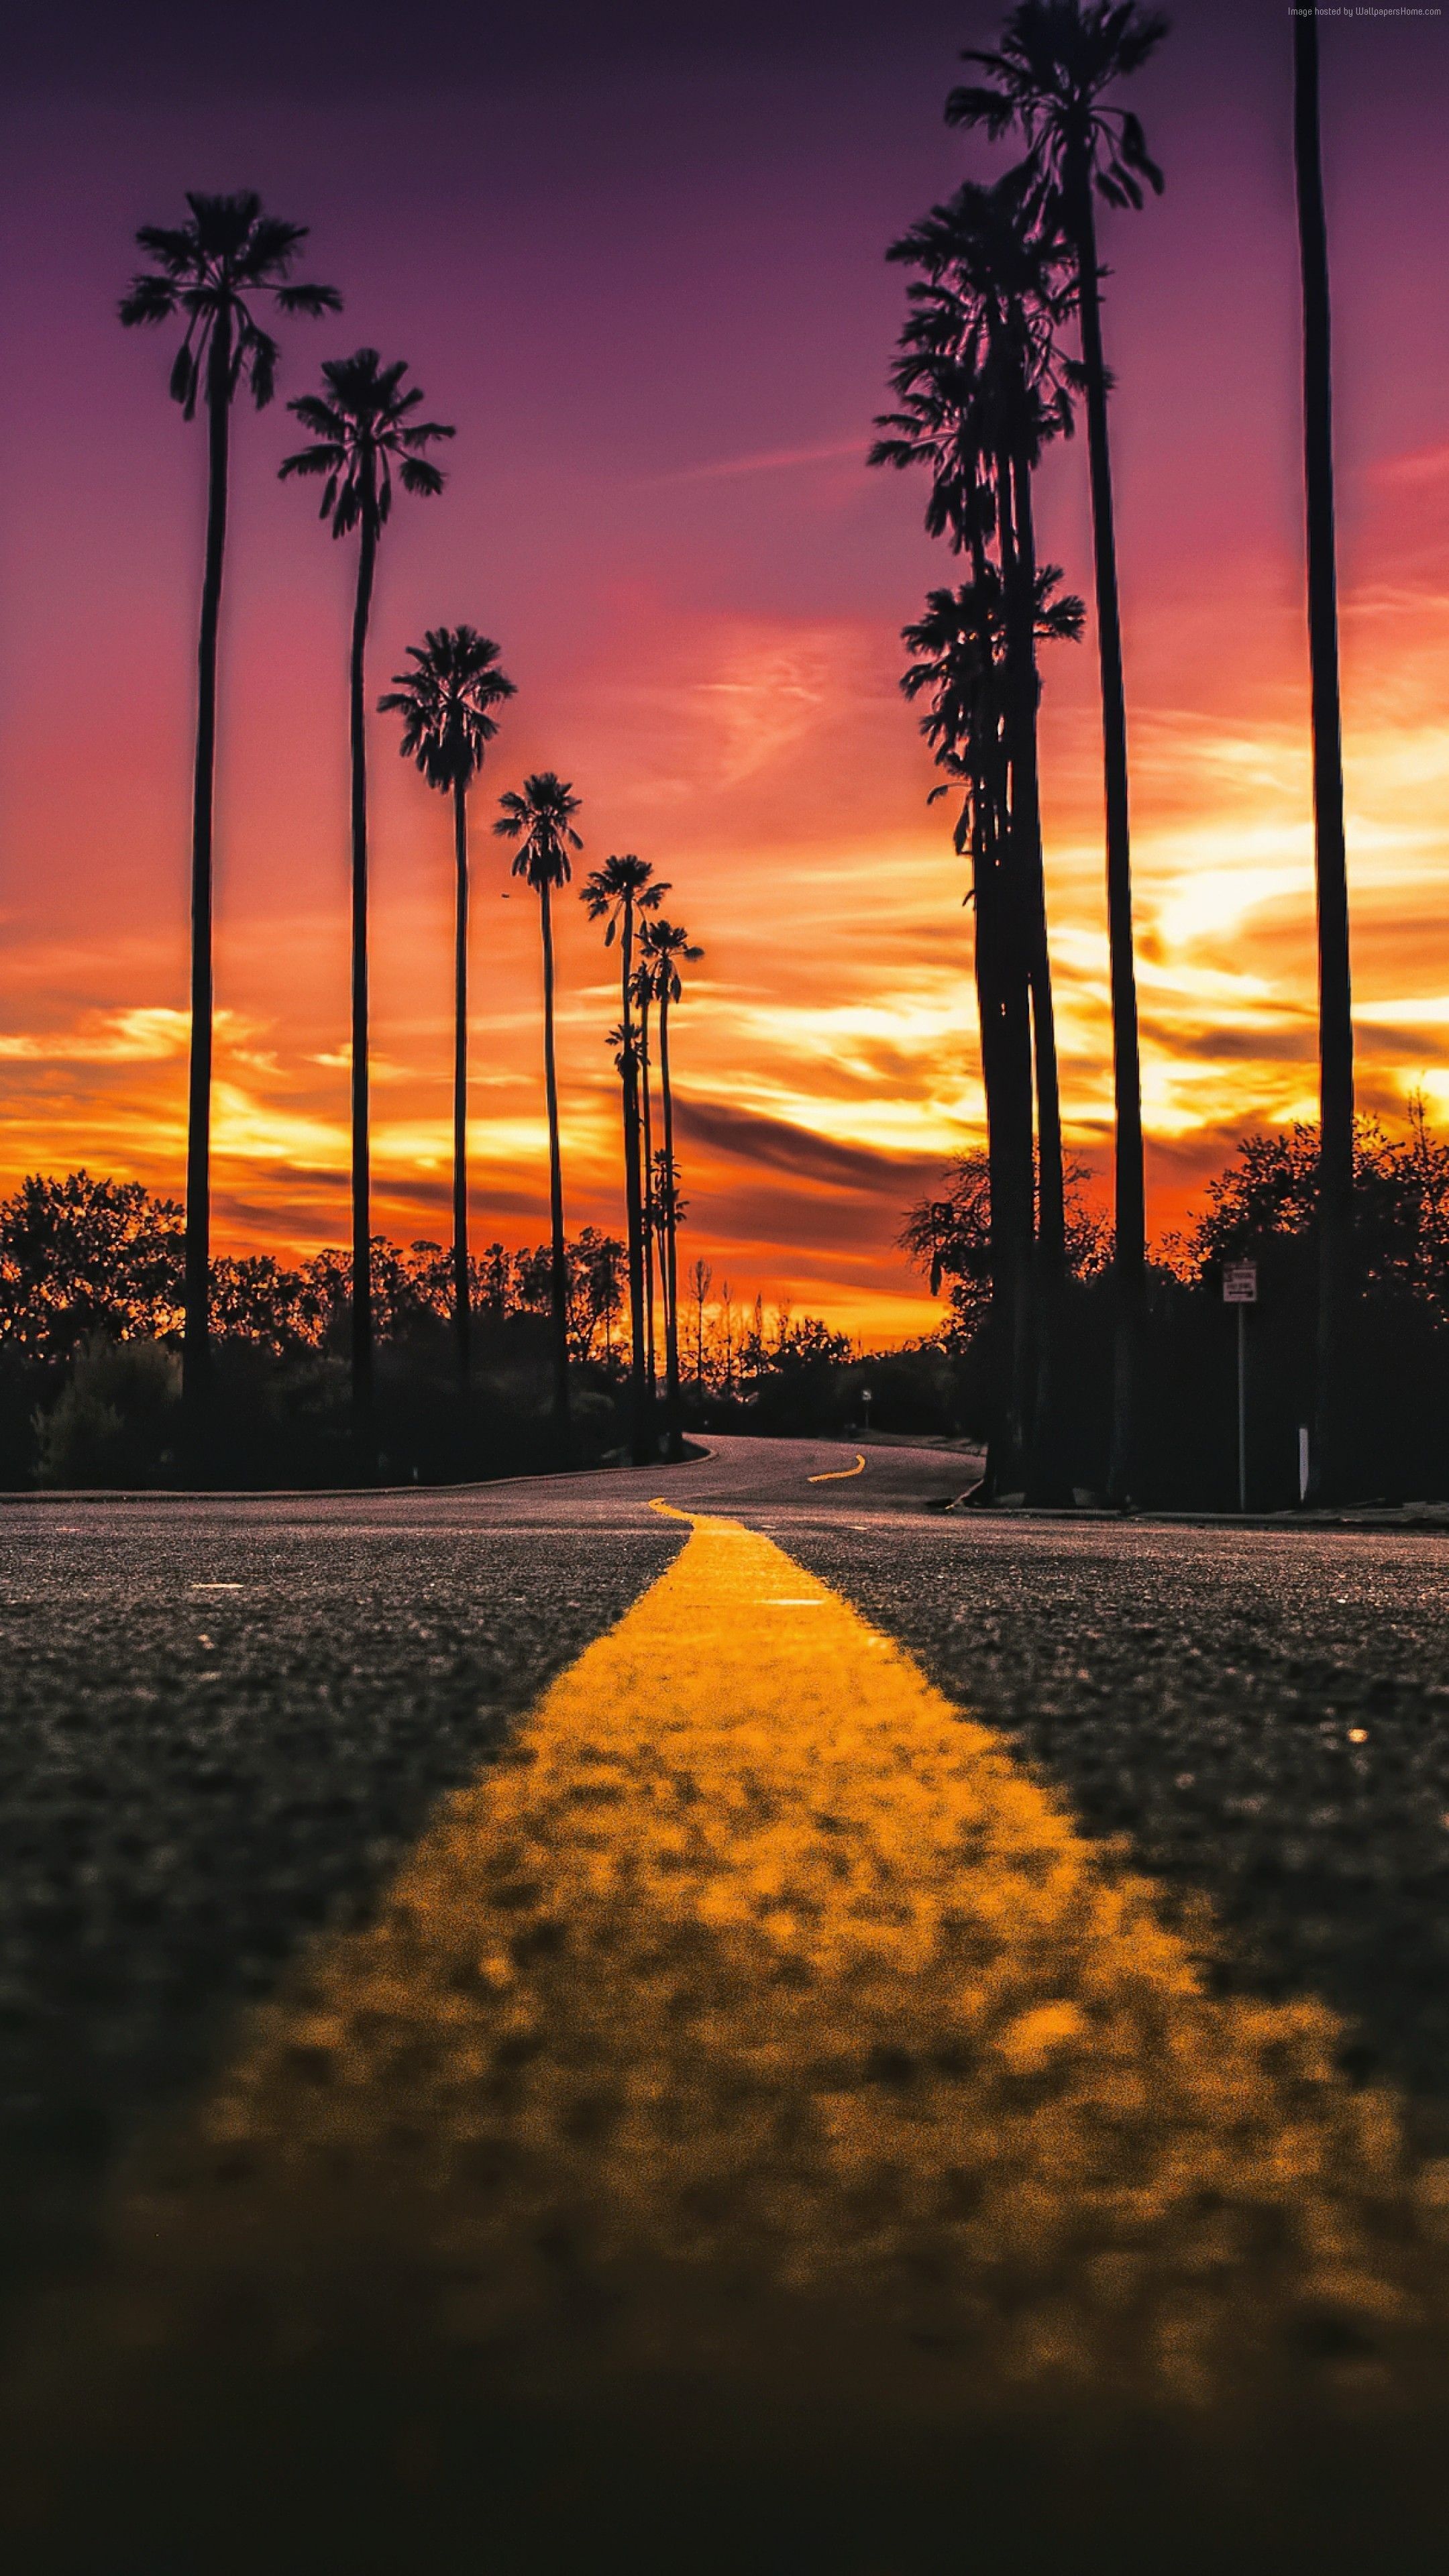 Awesome Miami iPhone Wallpaper. California wallpaper, Sunset wallpaper, Summer nature photography